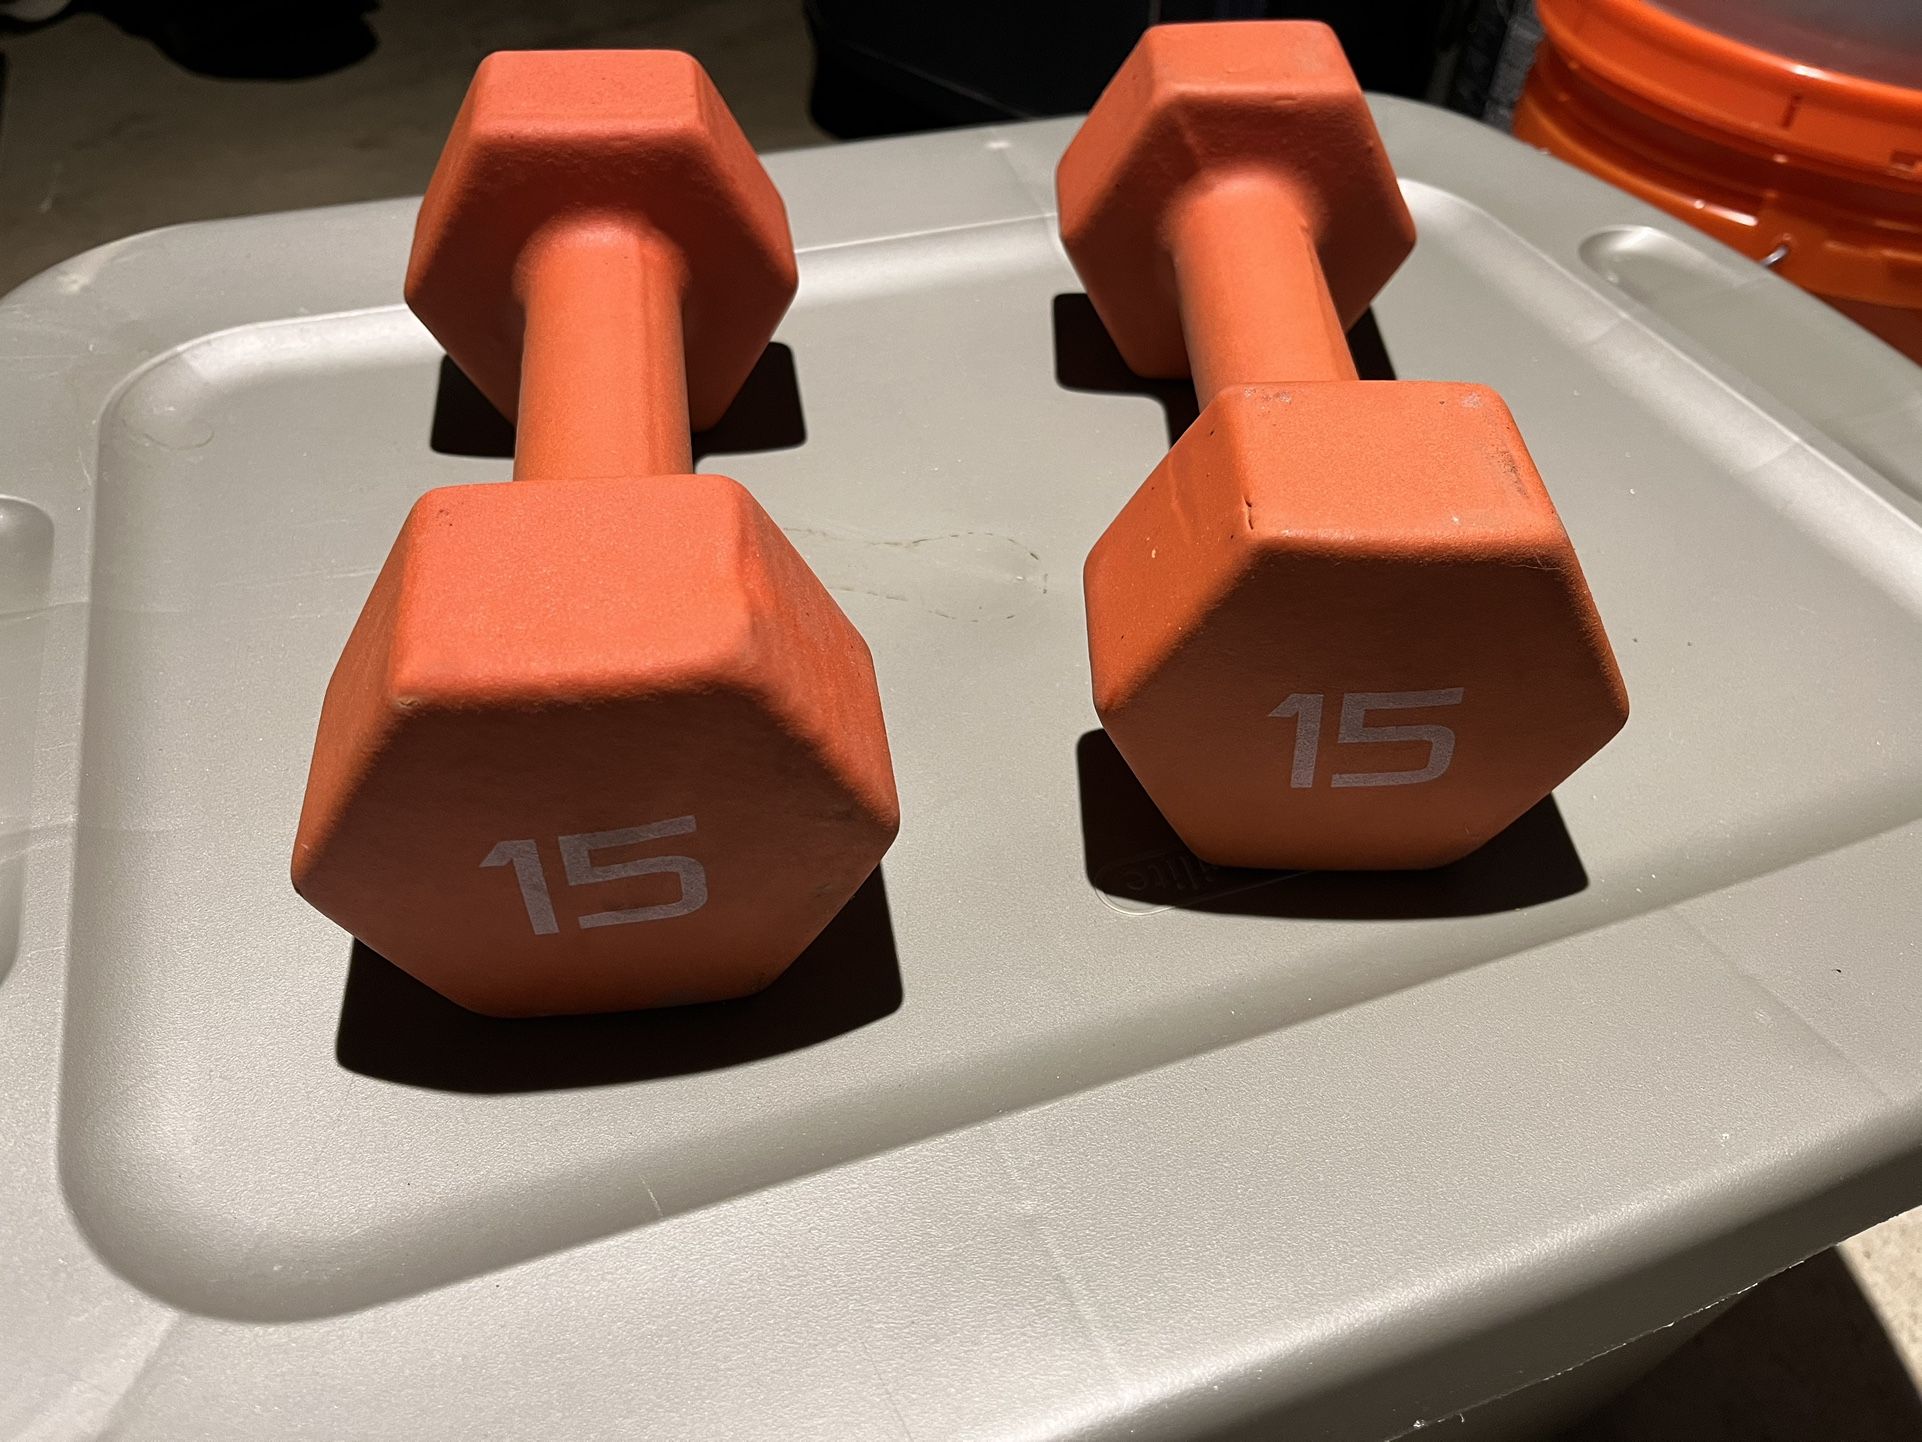 Dumbell Weights - 15lbs